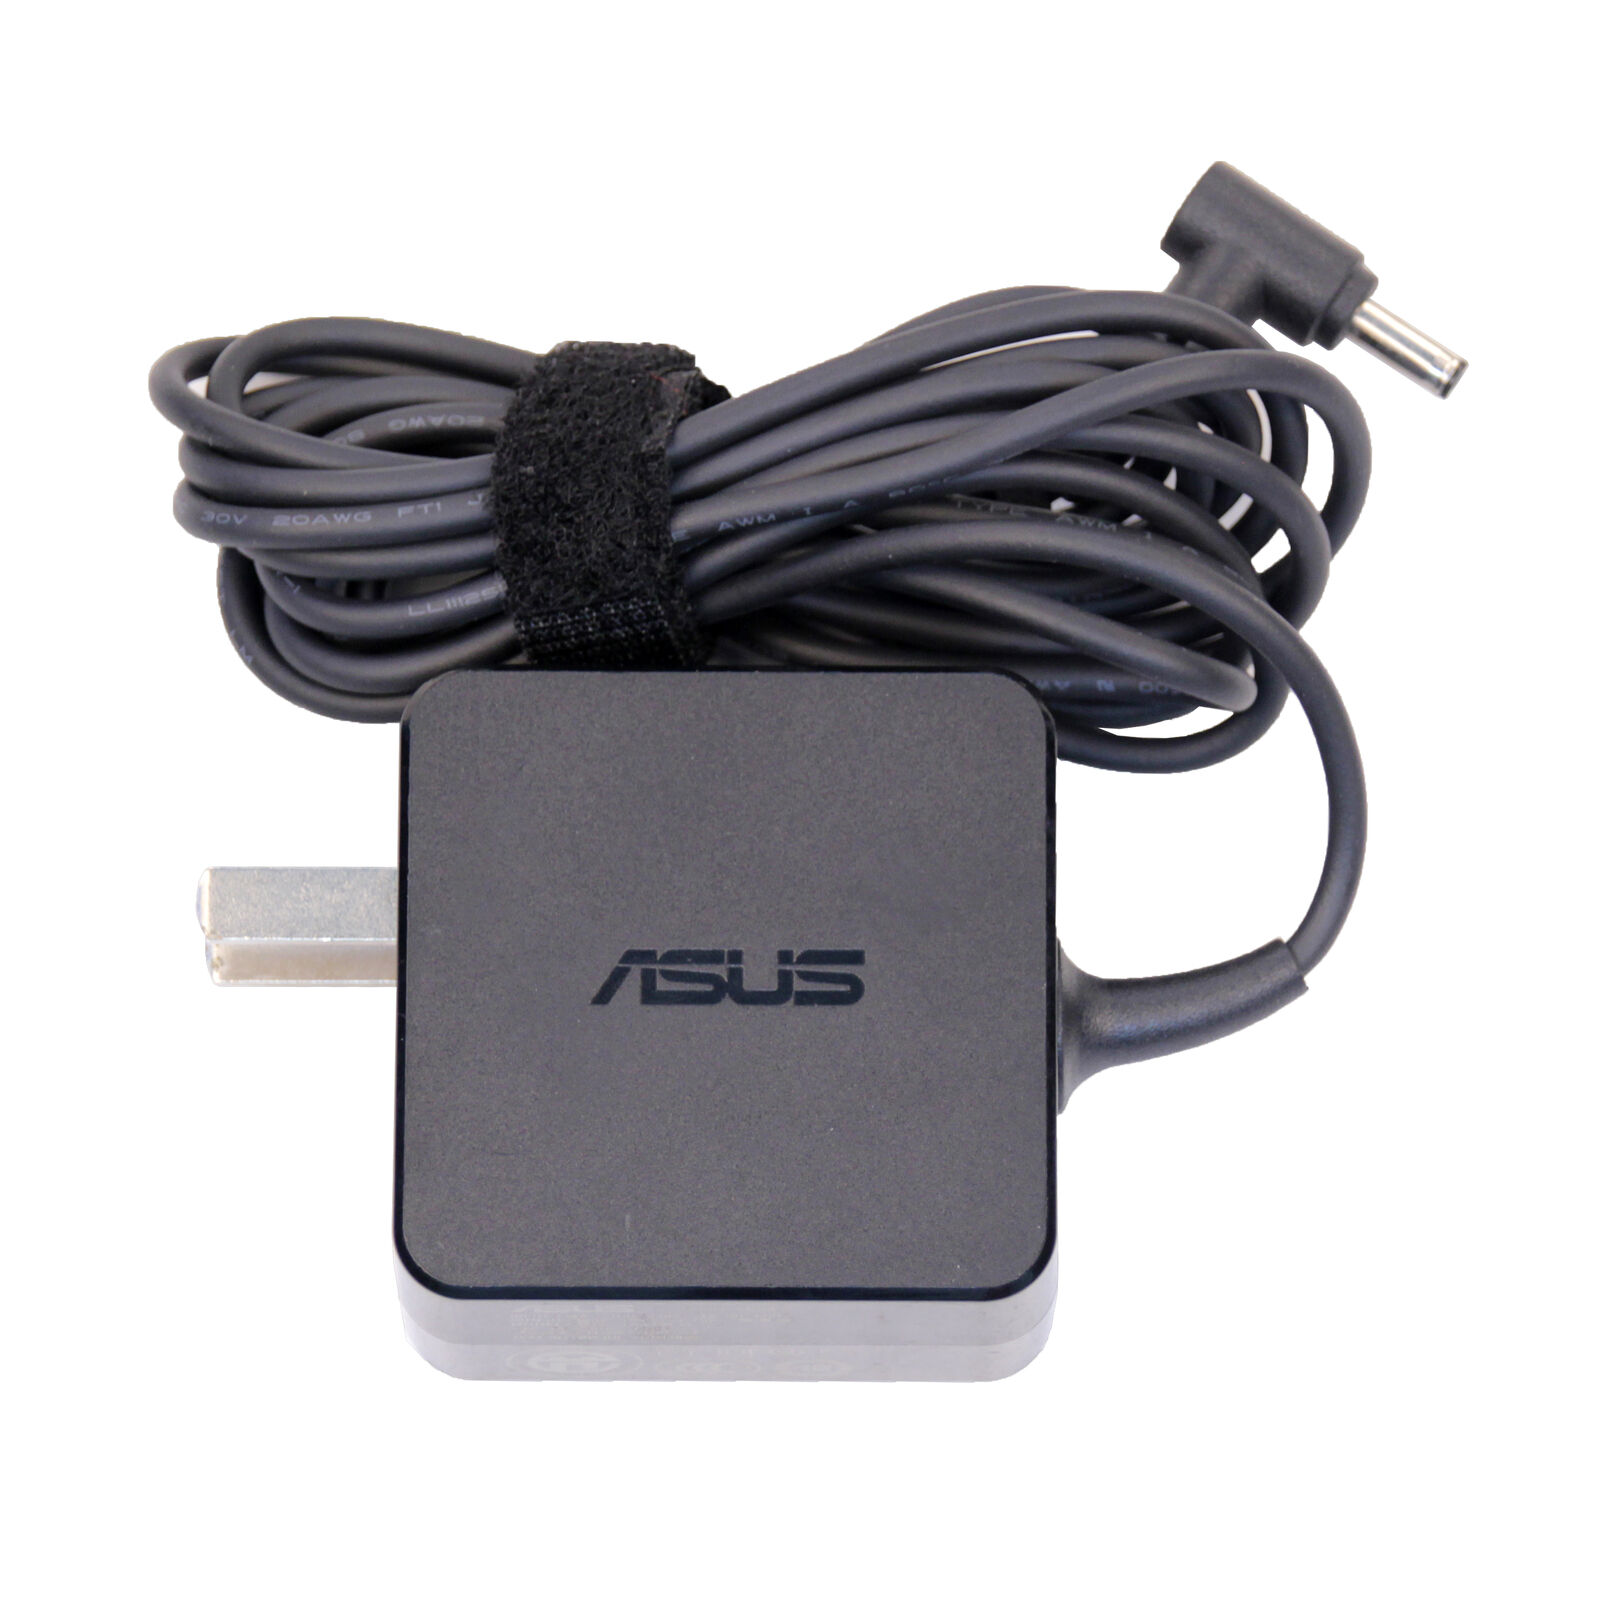 ASUS AD890026 19V 1.75A 33W Genuine Original AC Power Adapter Charger